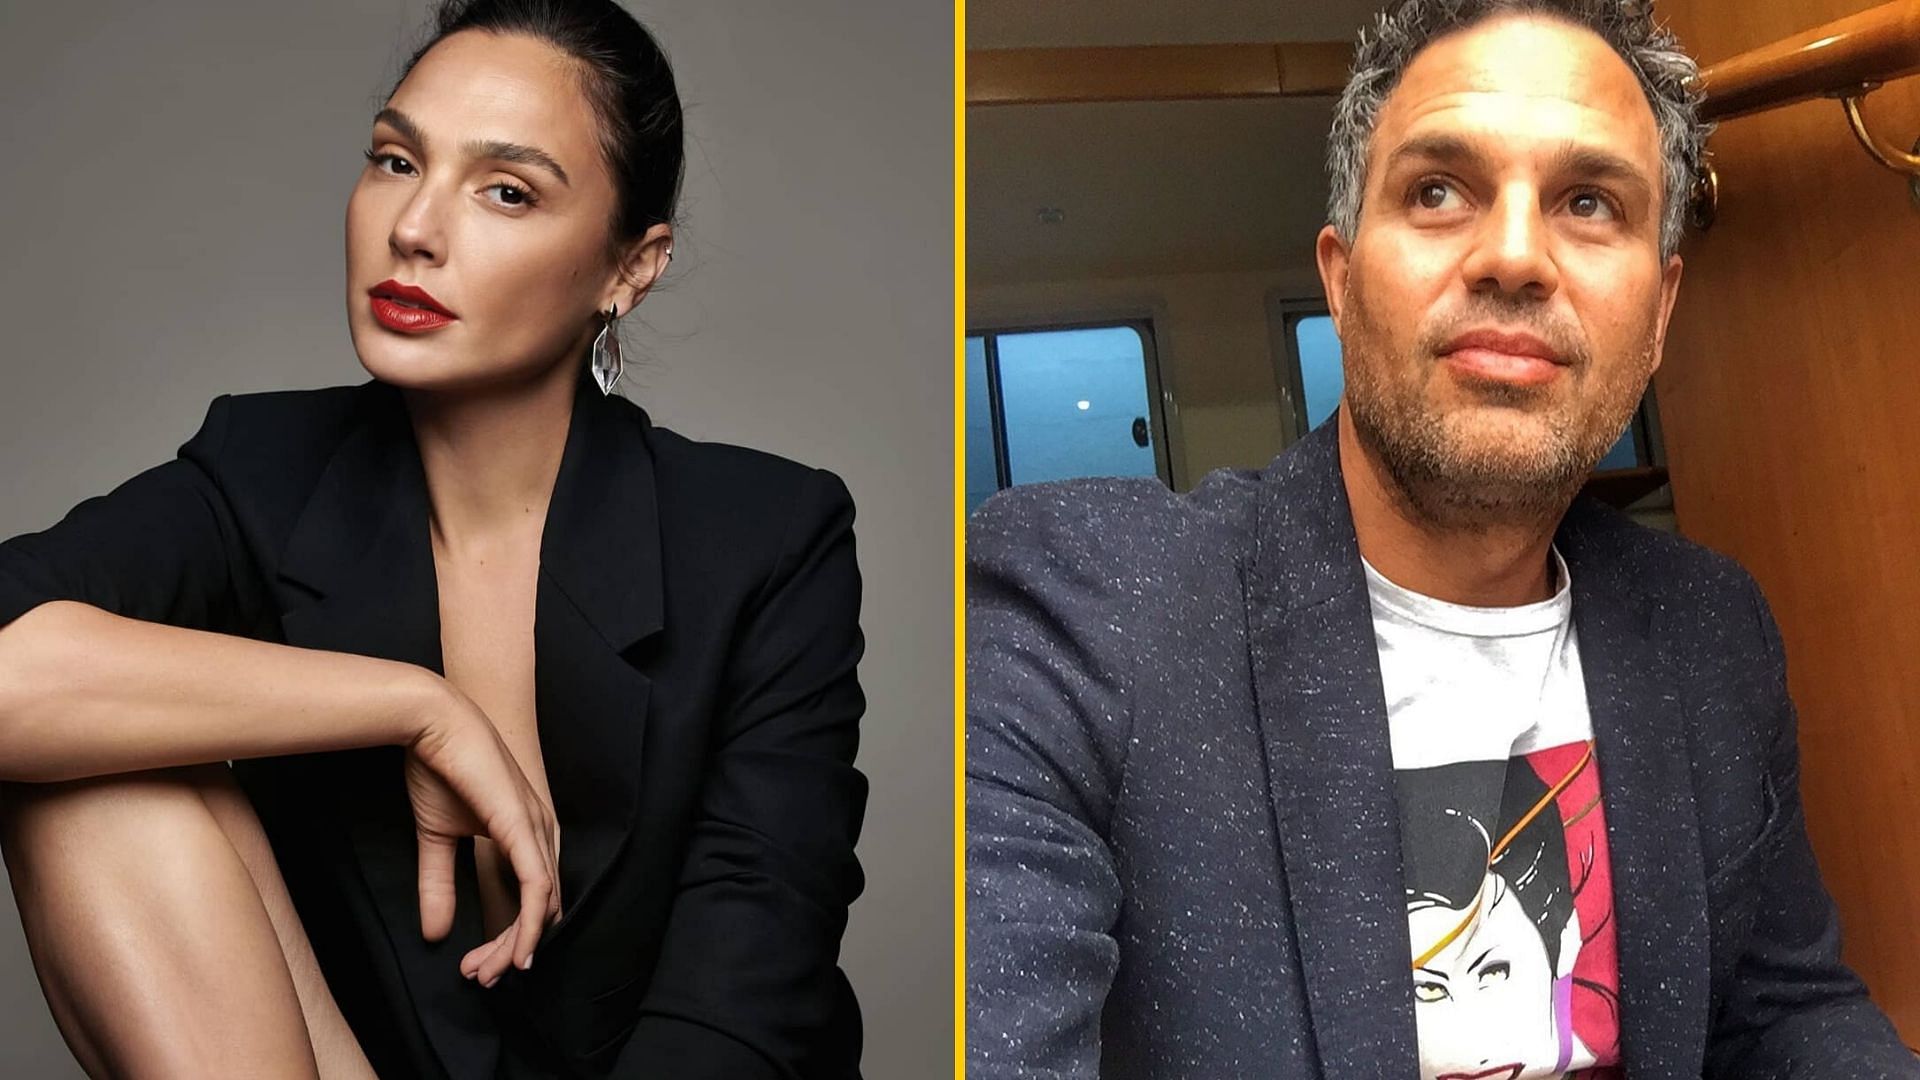 Gal Gadot, Mark Ruffalo and other celebs sing <i>Imagine</i> during their social distancing period.&nbsp;